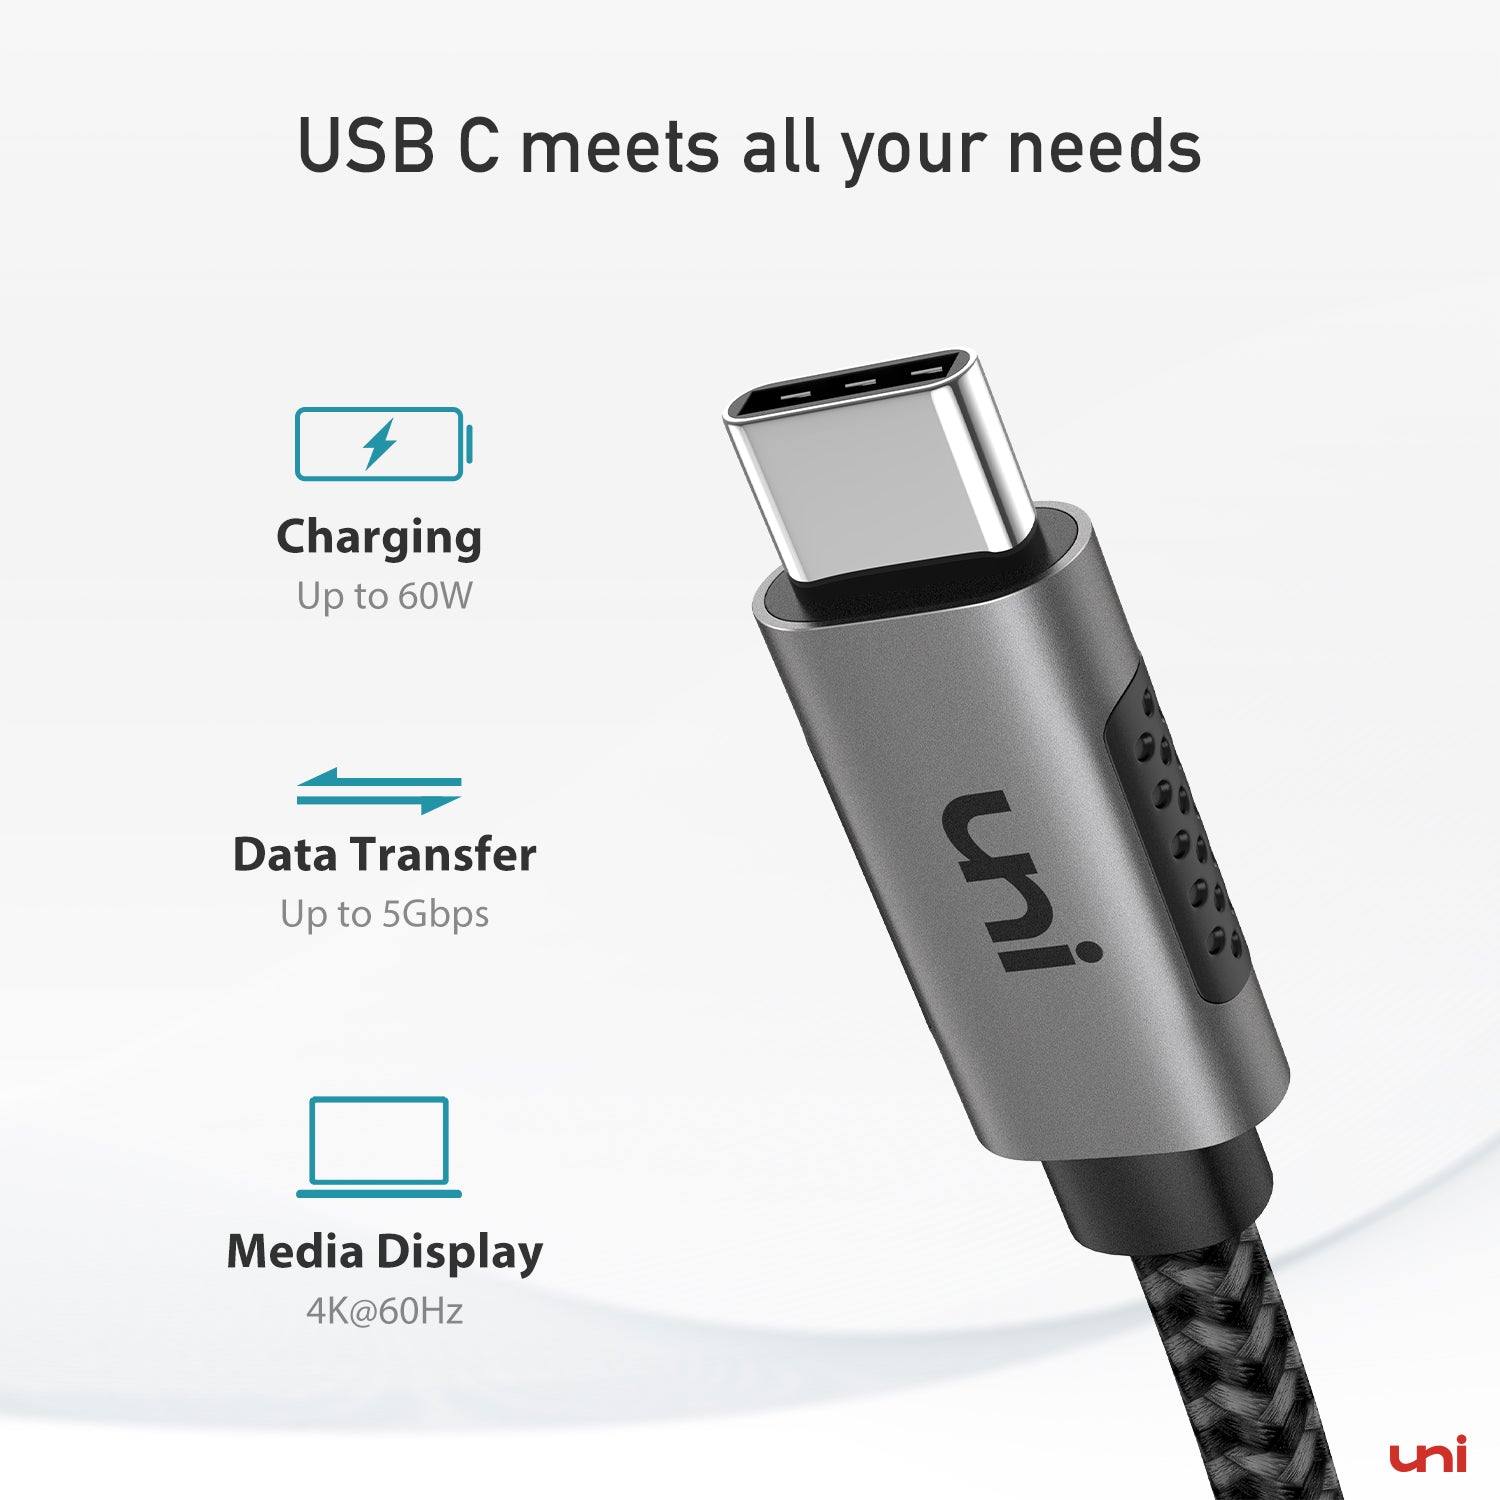 USB C Charger Cable, USB Type C to USB C Video Cable | uni